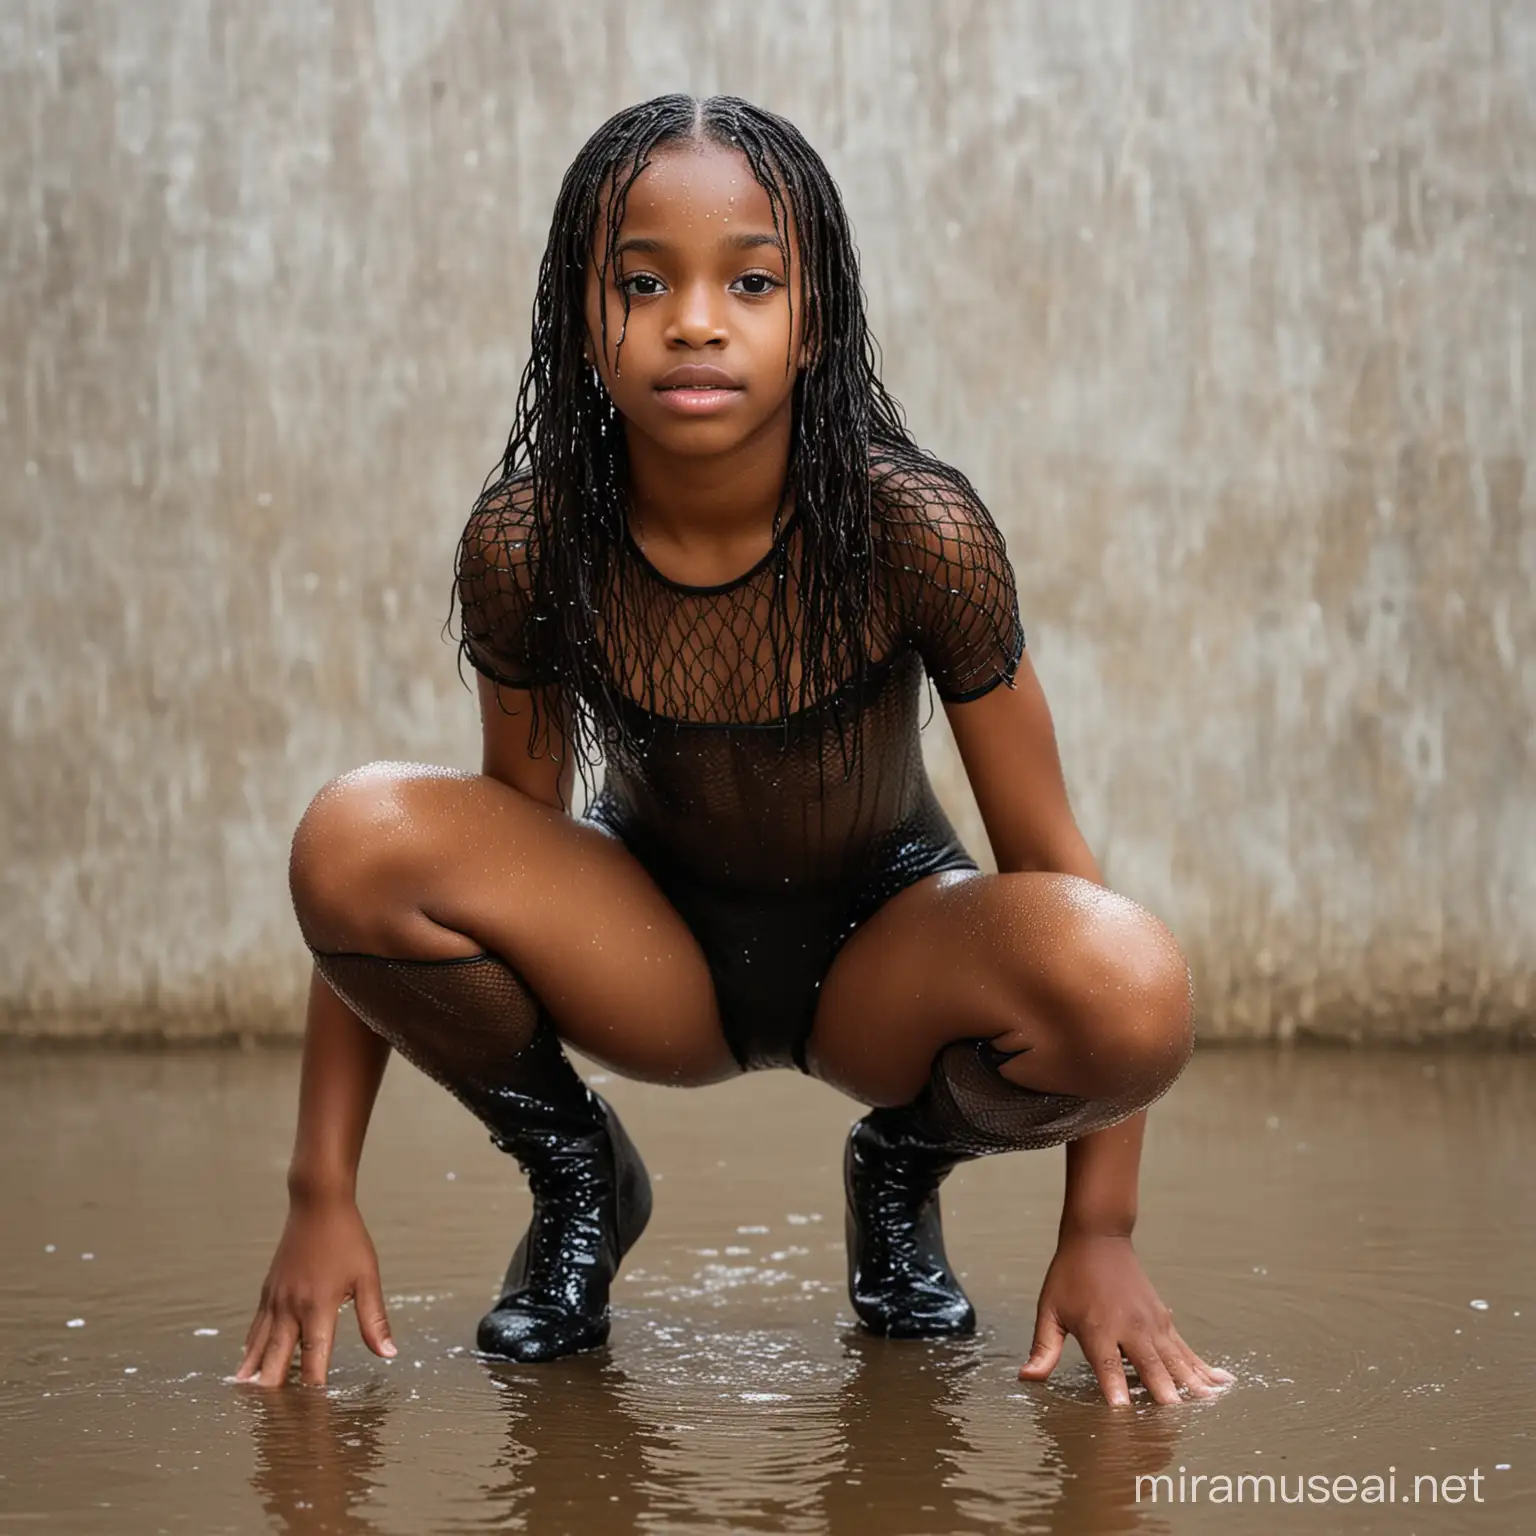 in rain, long wet hair, wet skin, neutral face expression, African American 10-year-old girl in fishnet leotard, posing, leaning back, squatting, legs apart, view full body